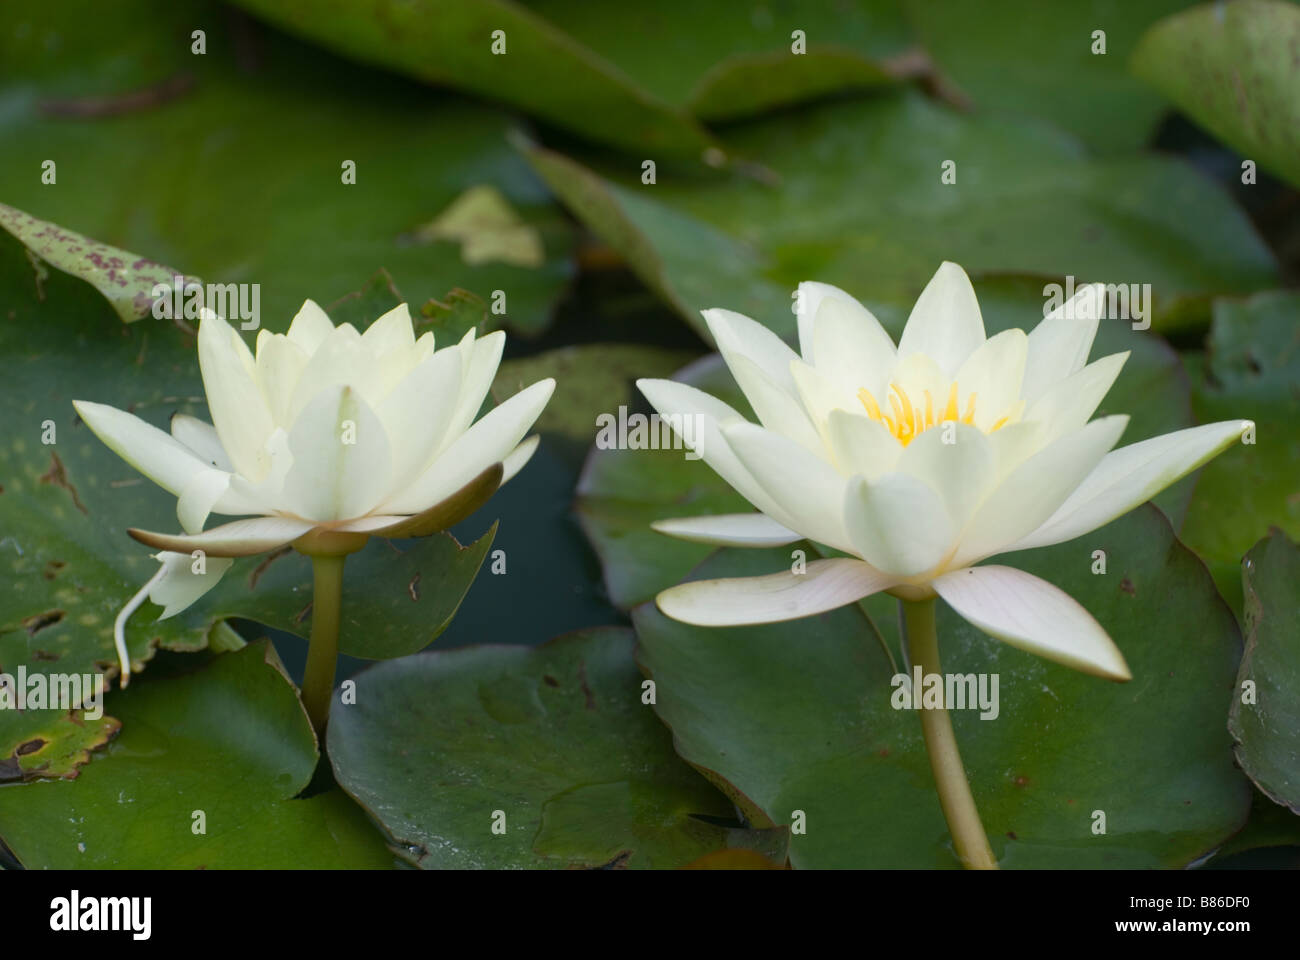 Water lily flowers Stock Photo